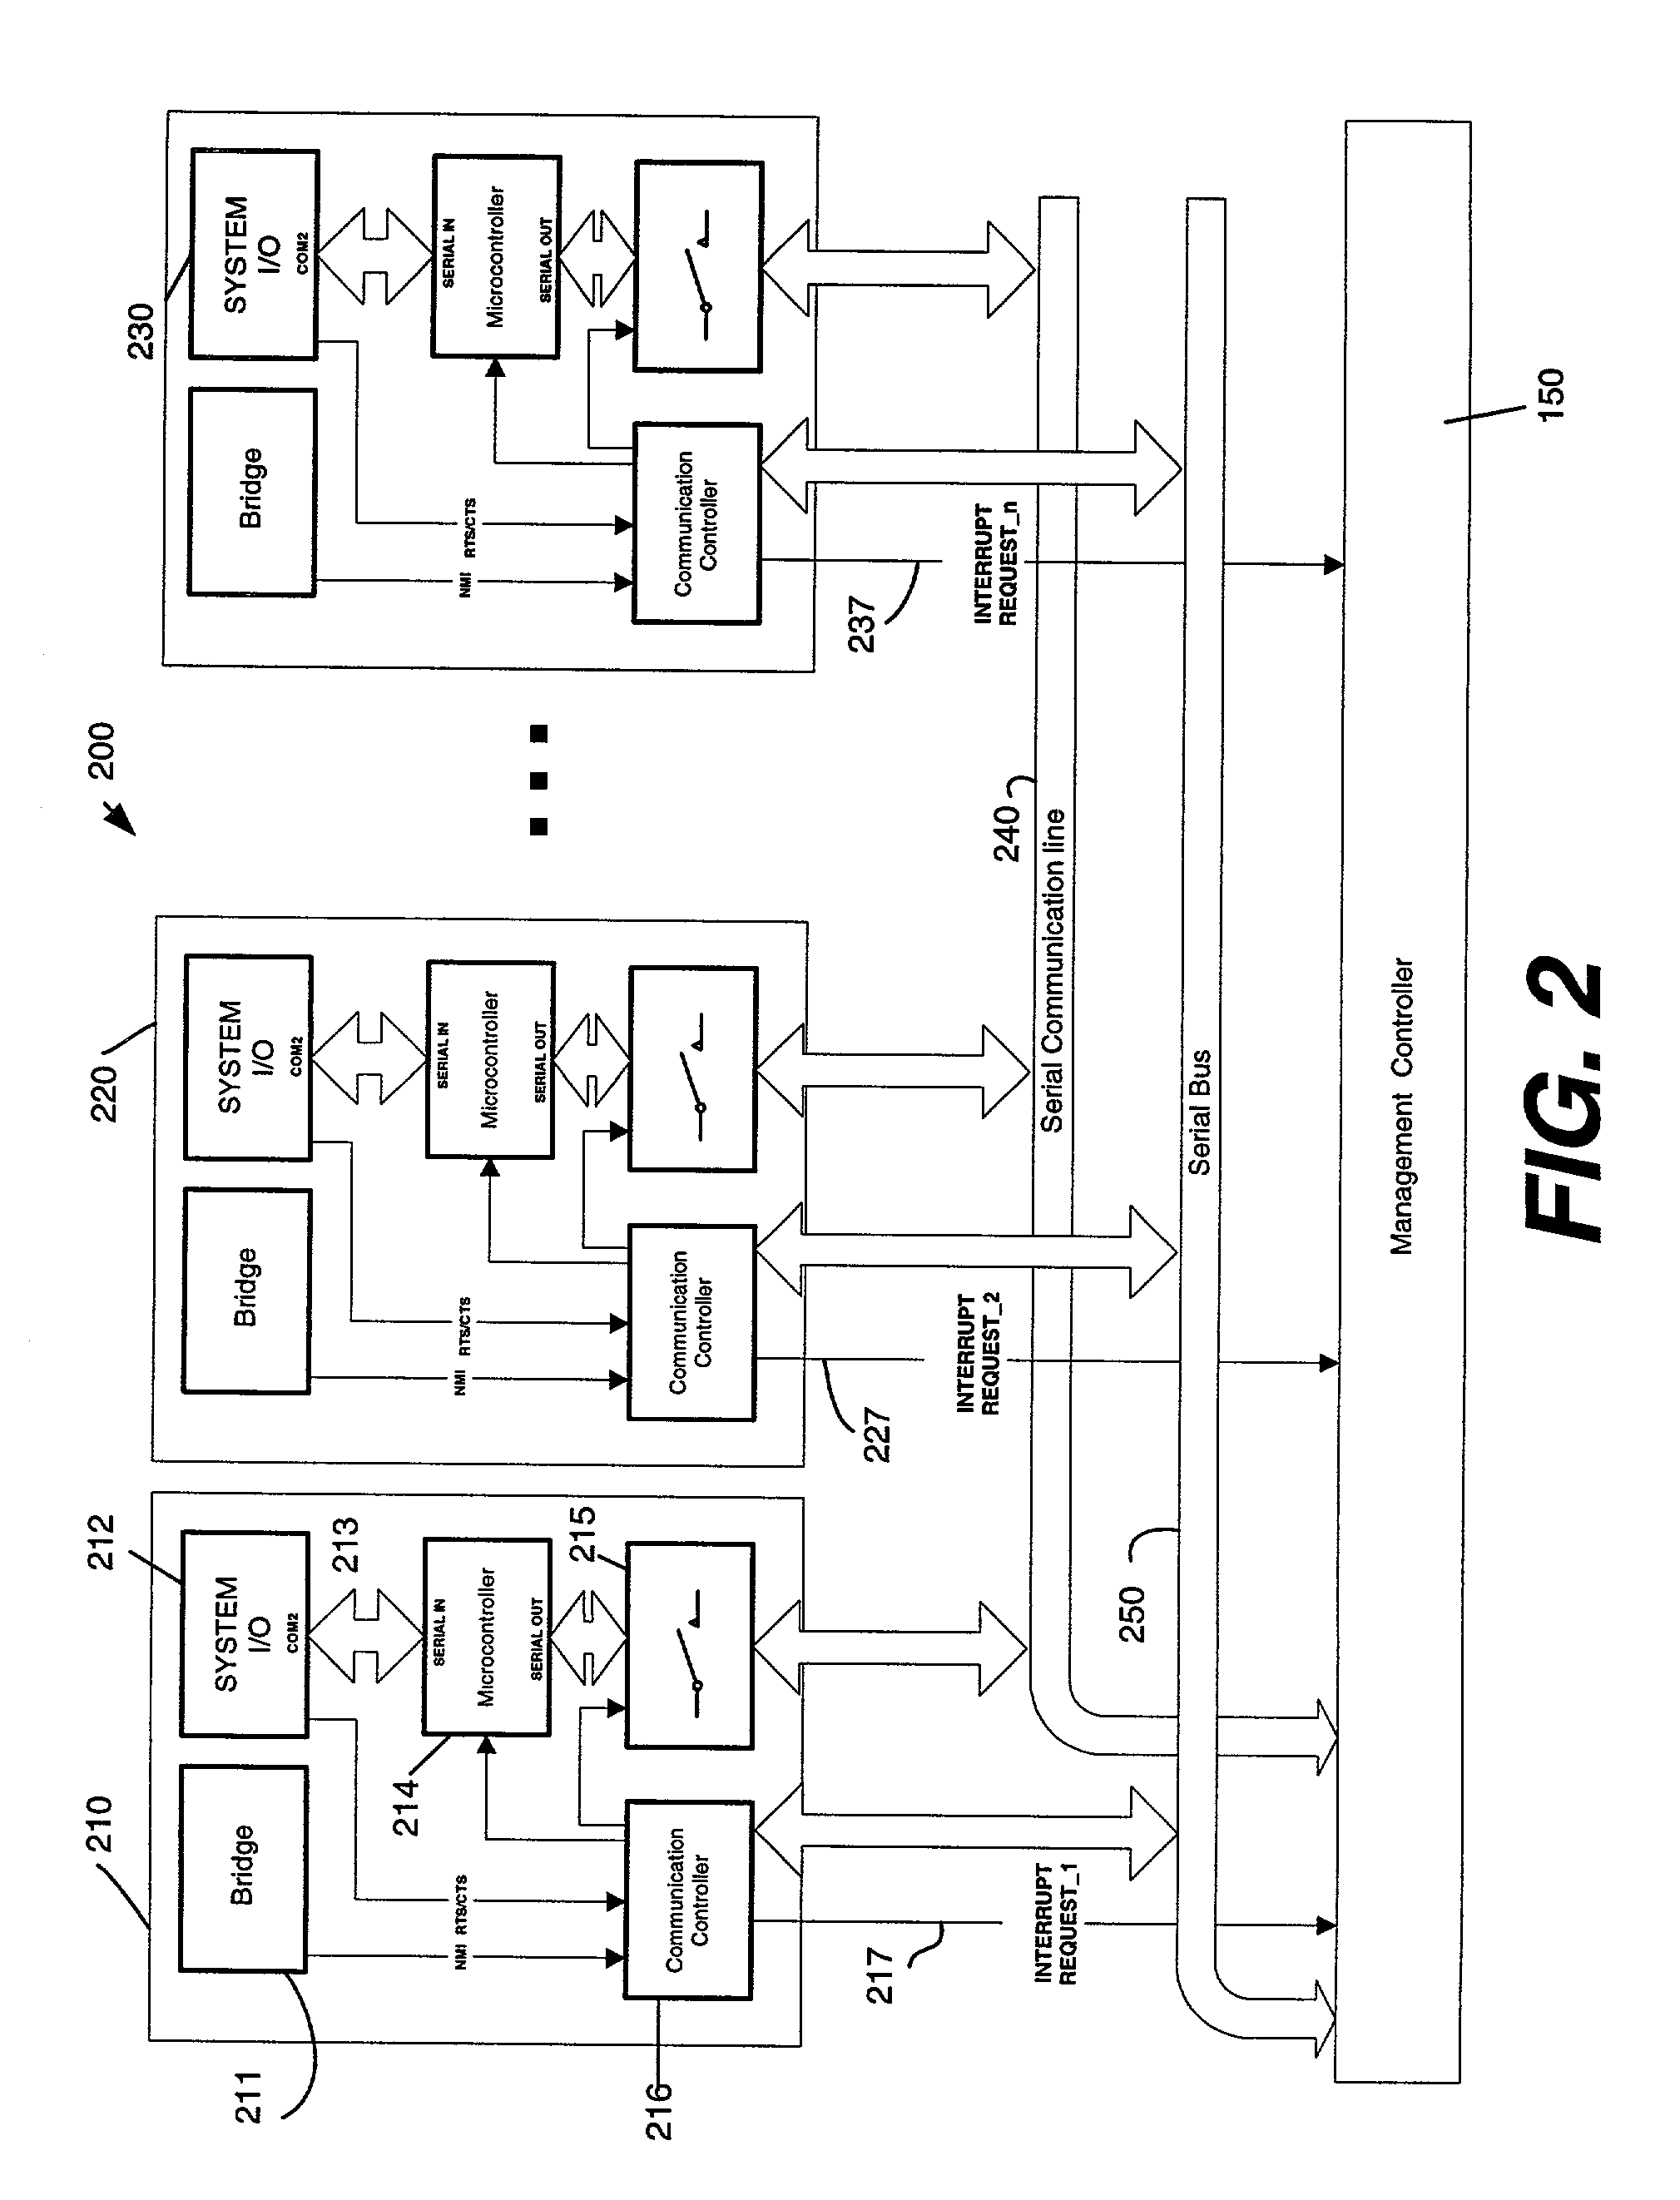 Computer system with improved data capture system